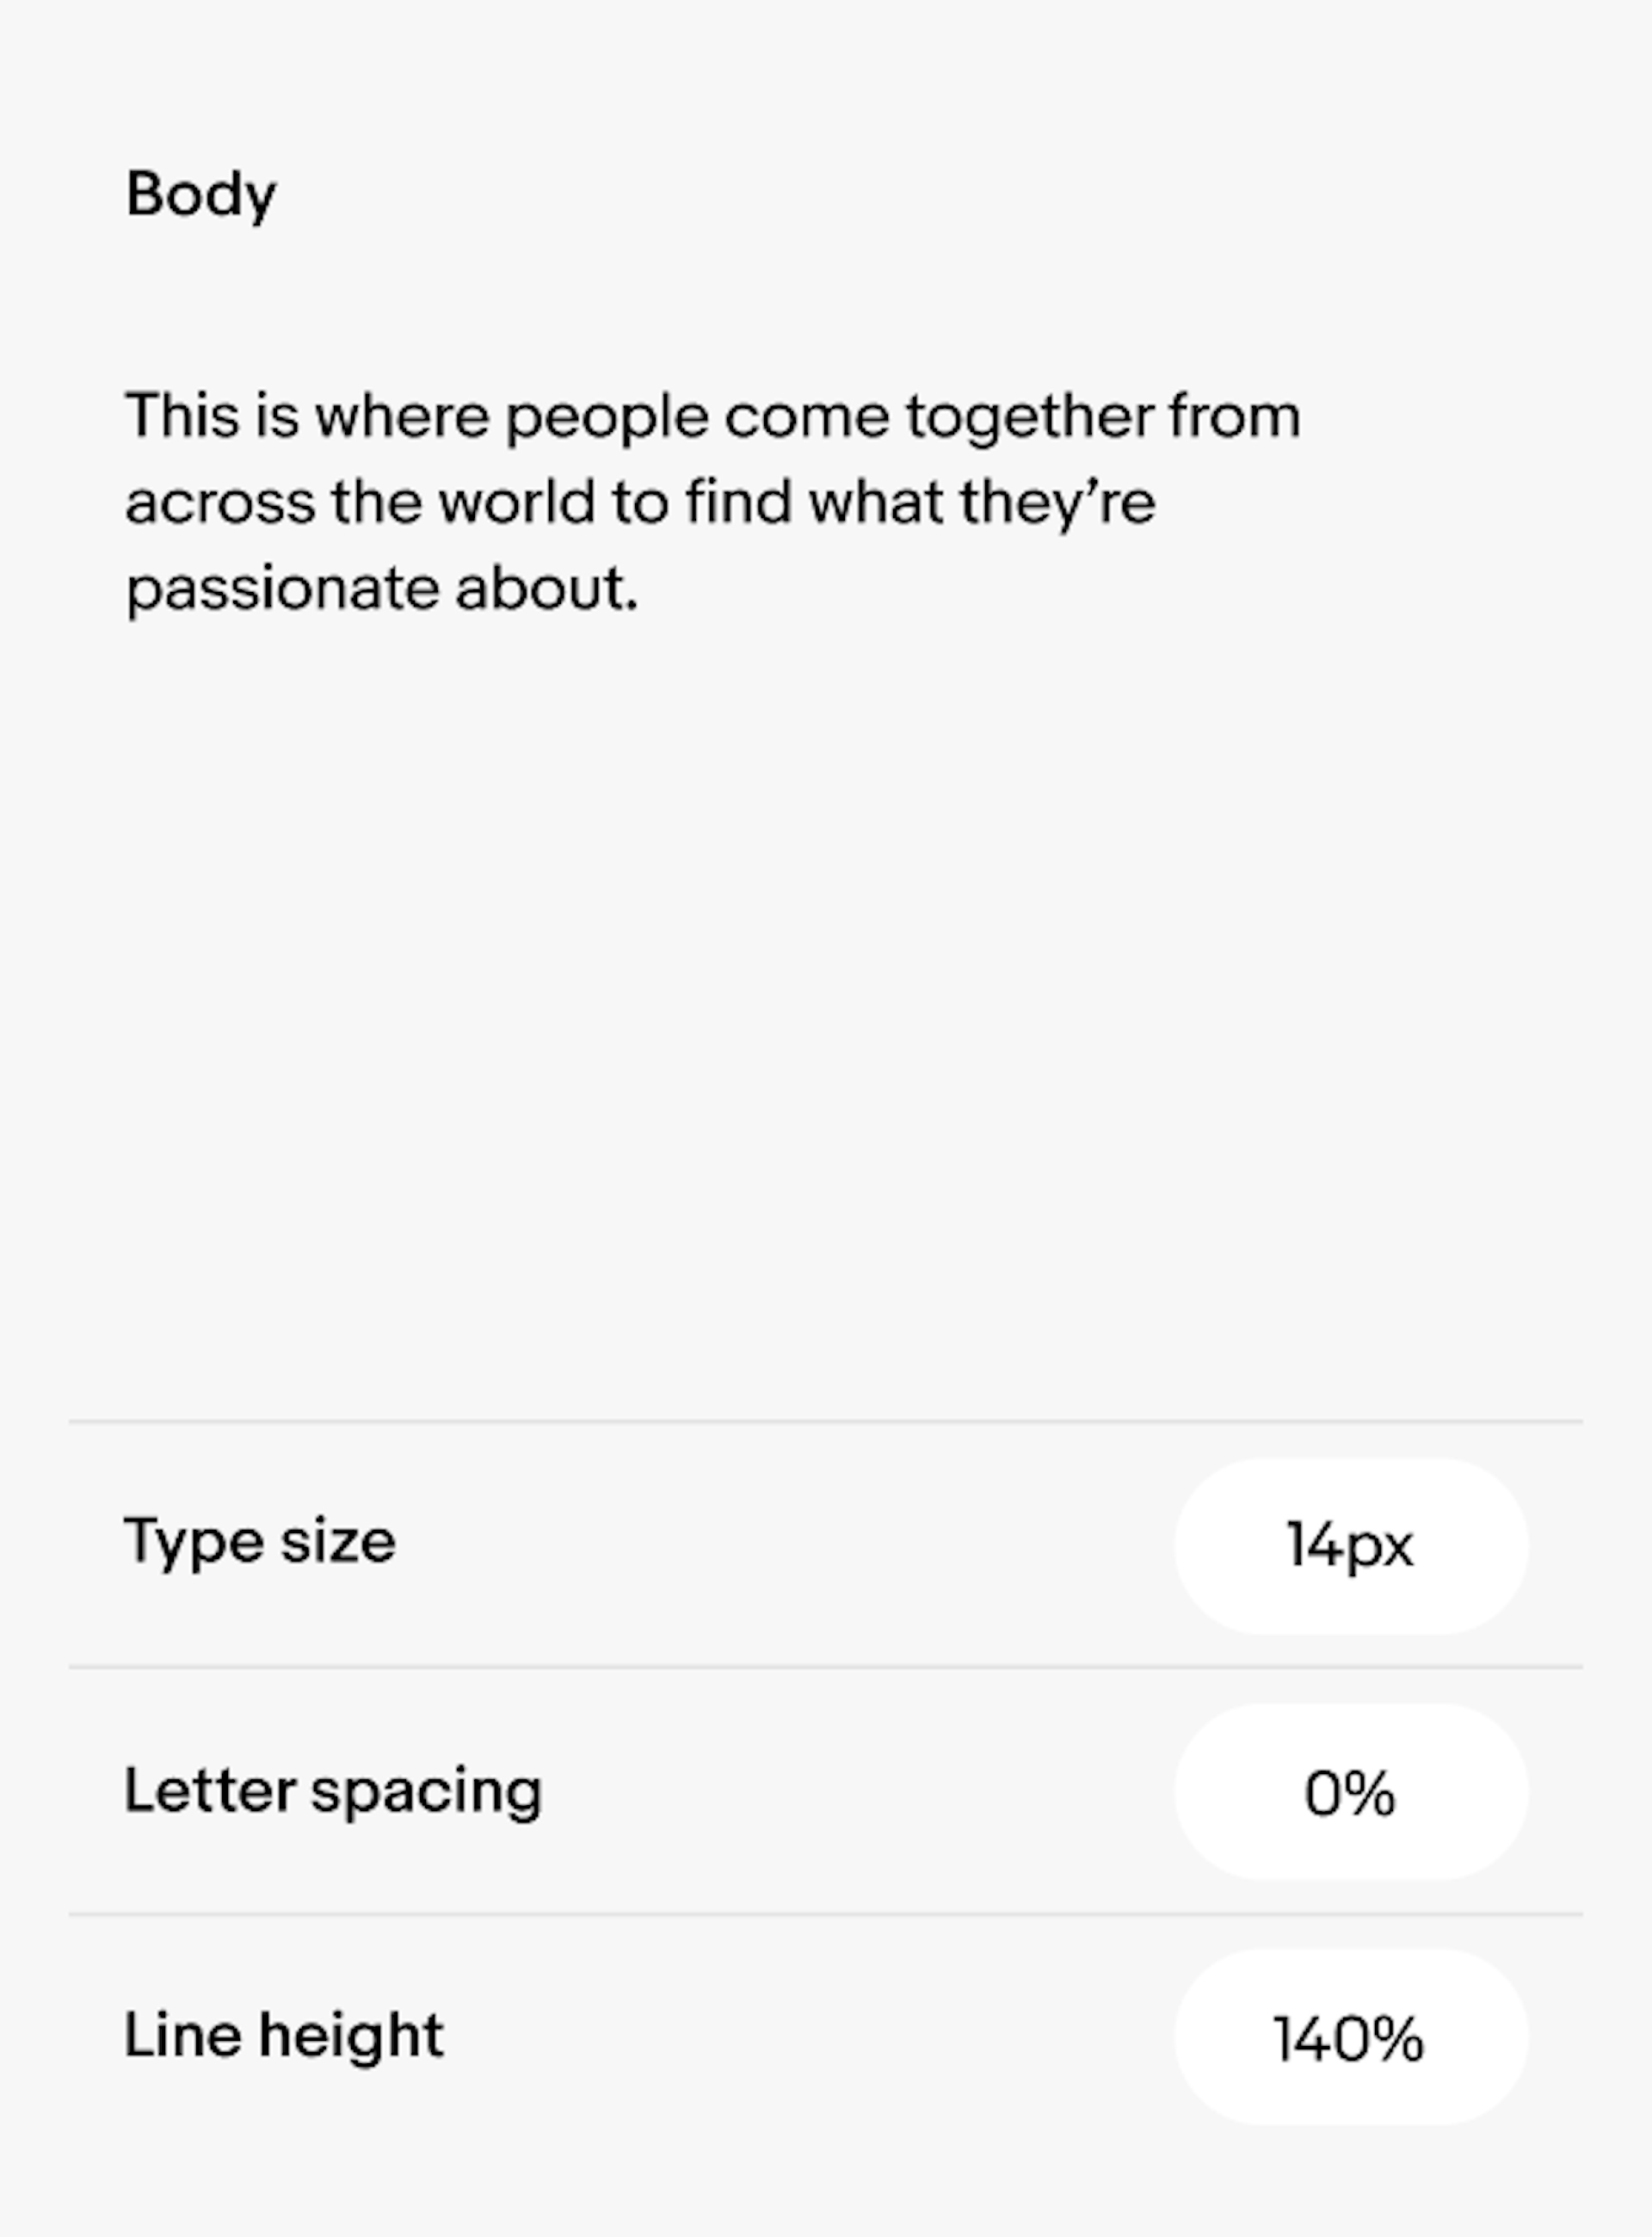 Body example text: 'This is where people come together from across the world to find what they're passionate about.' Body text has type size 14px, letter spacing 0%, line height 140%.